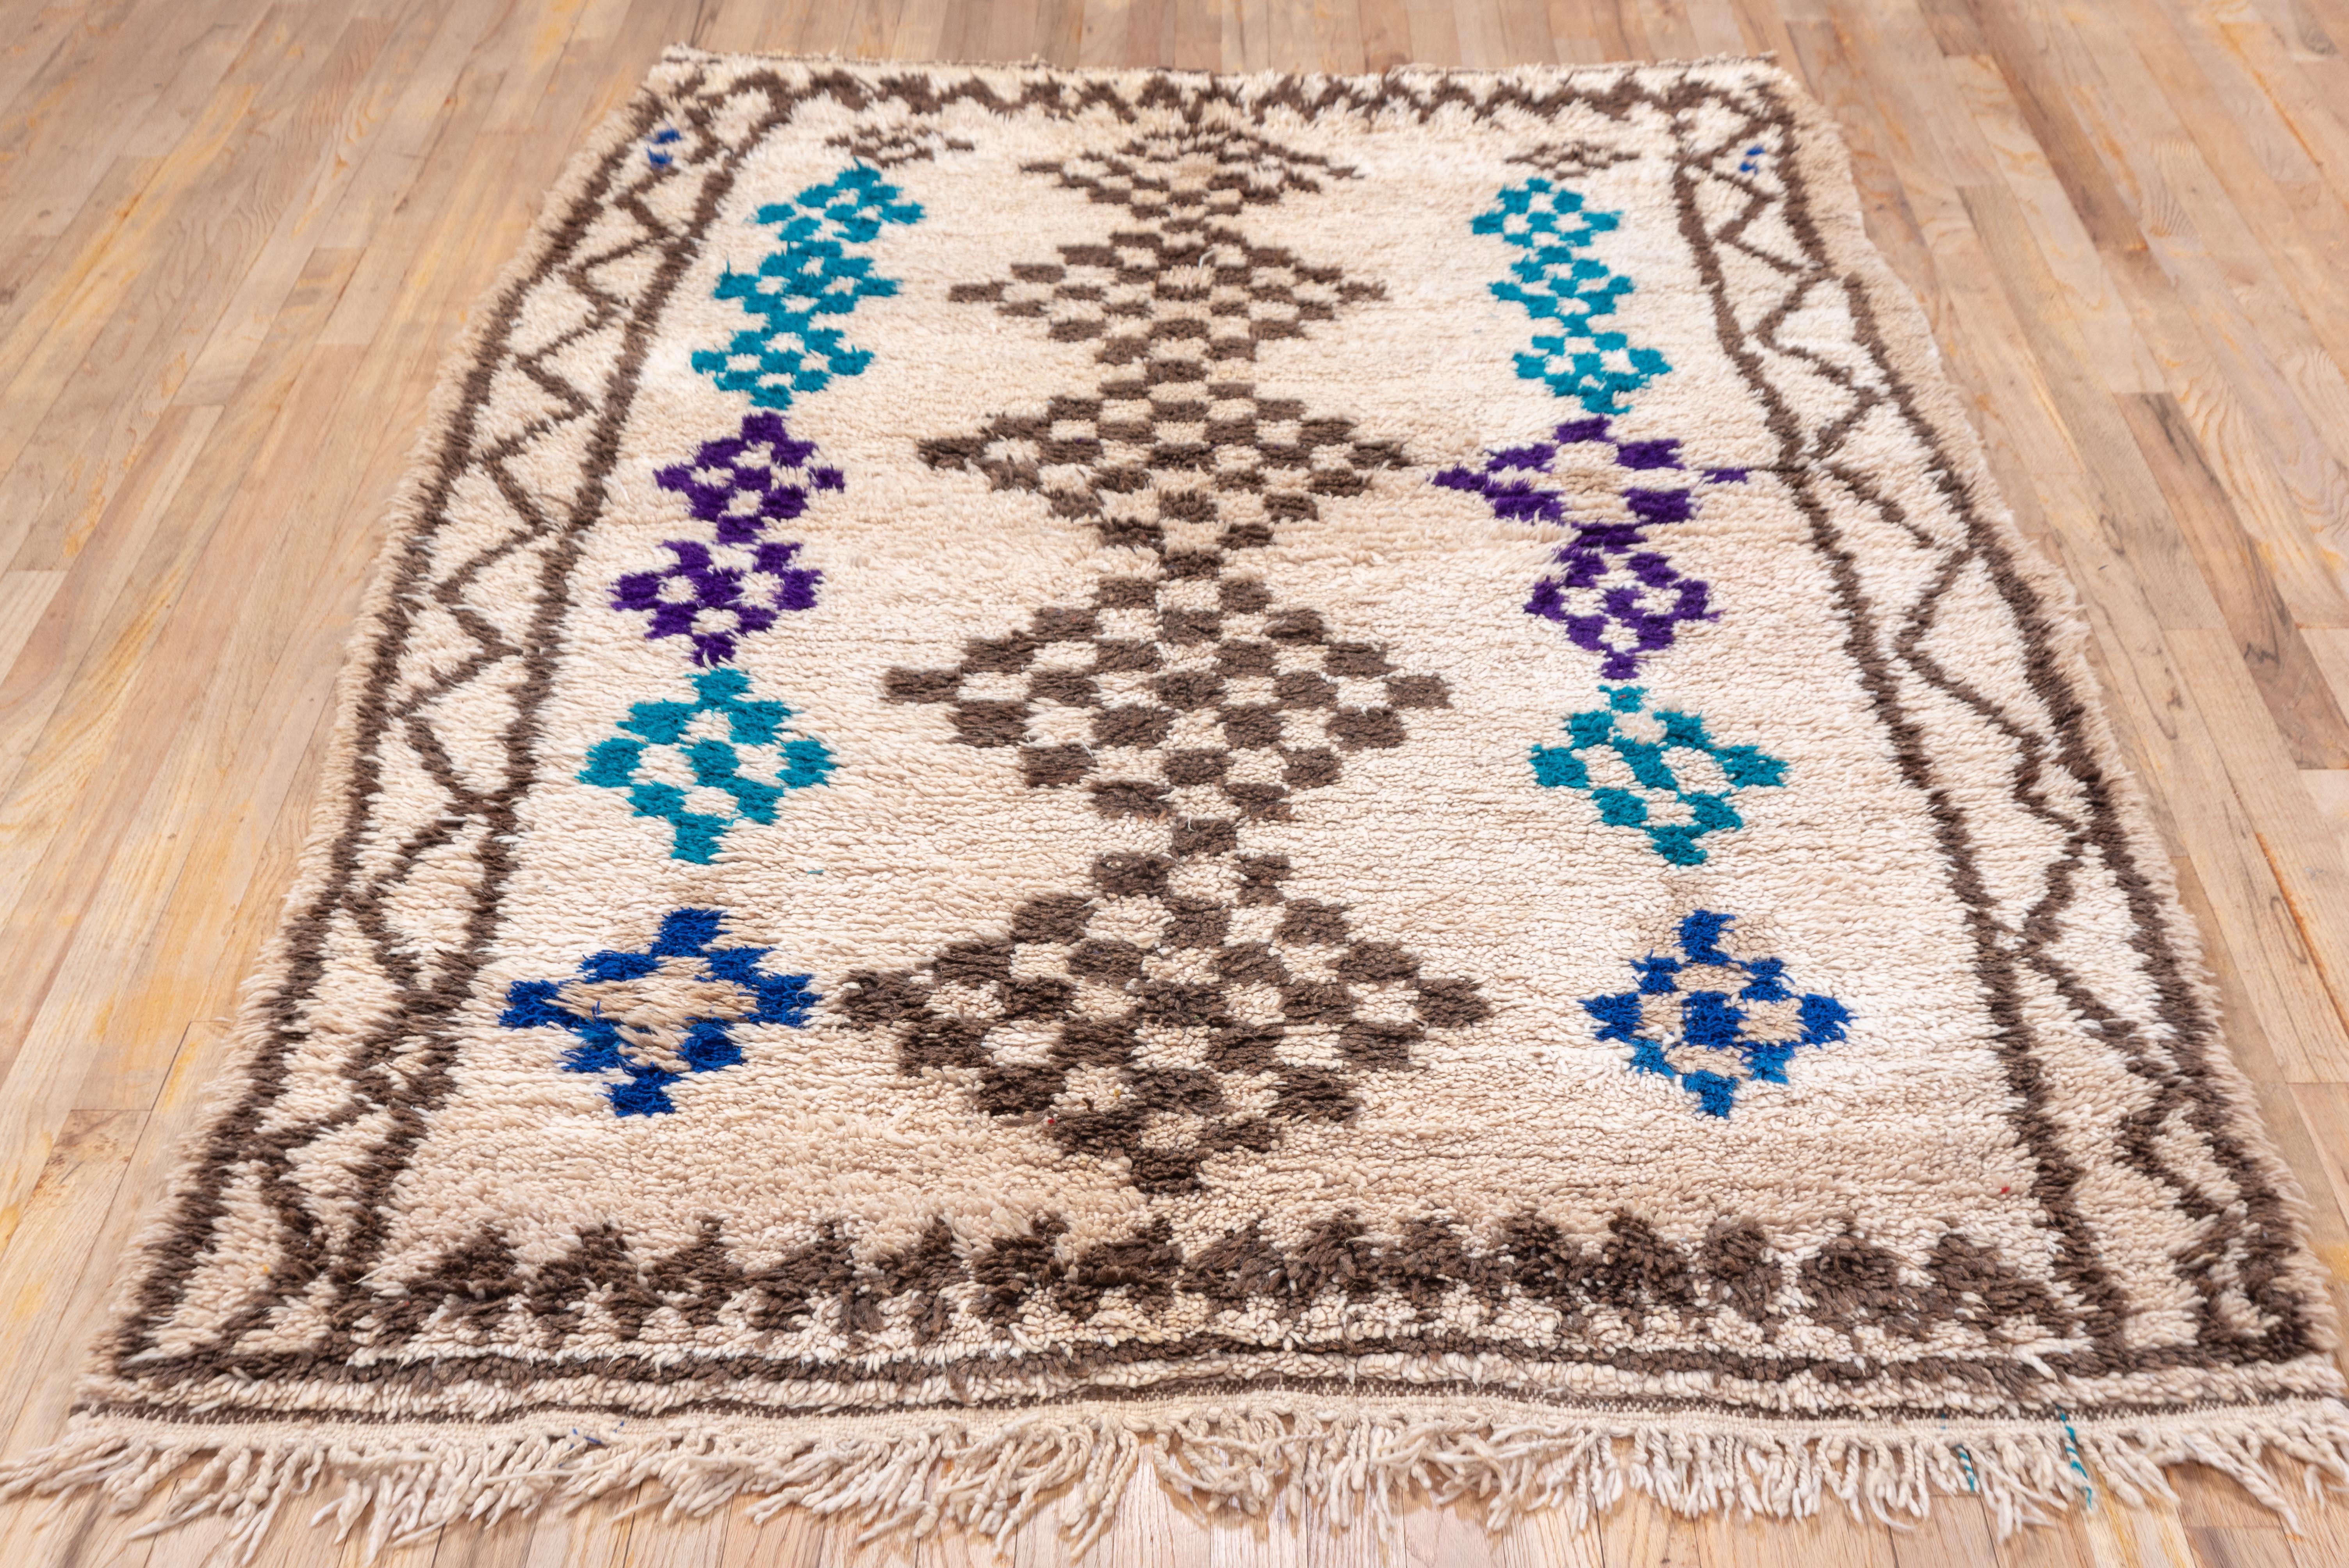 Gorgeous Moroccan tribal village rug in abstract, colorful design in purple navy and teal with a cream field. 